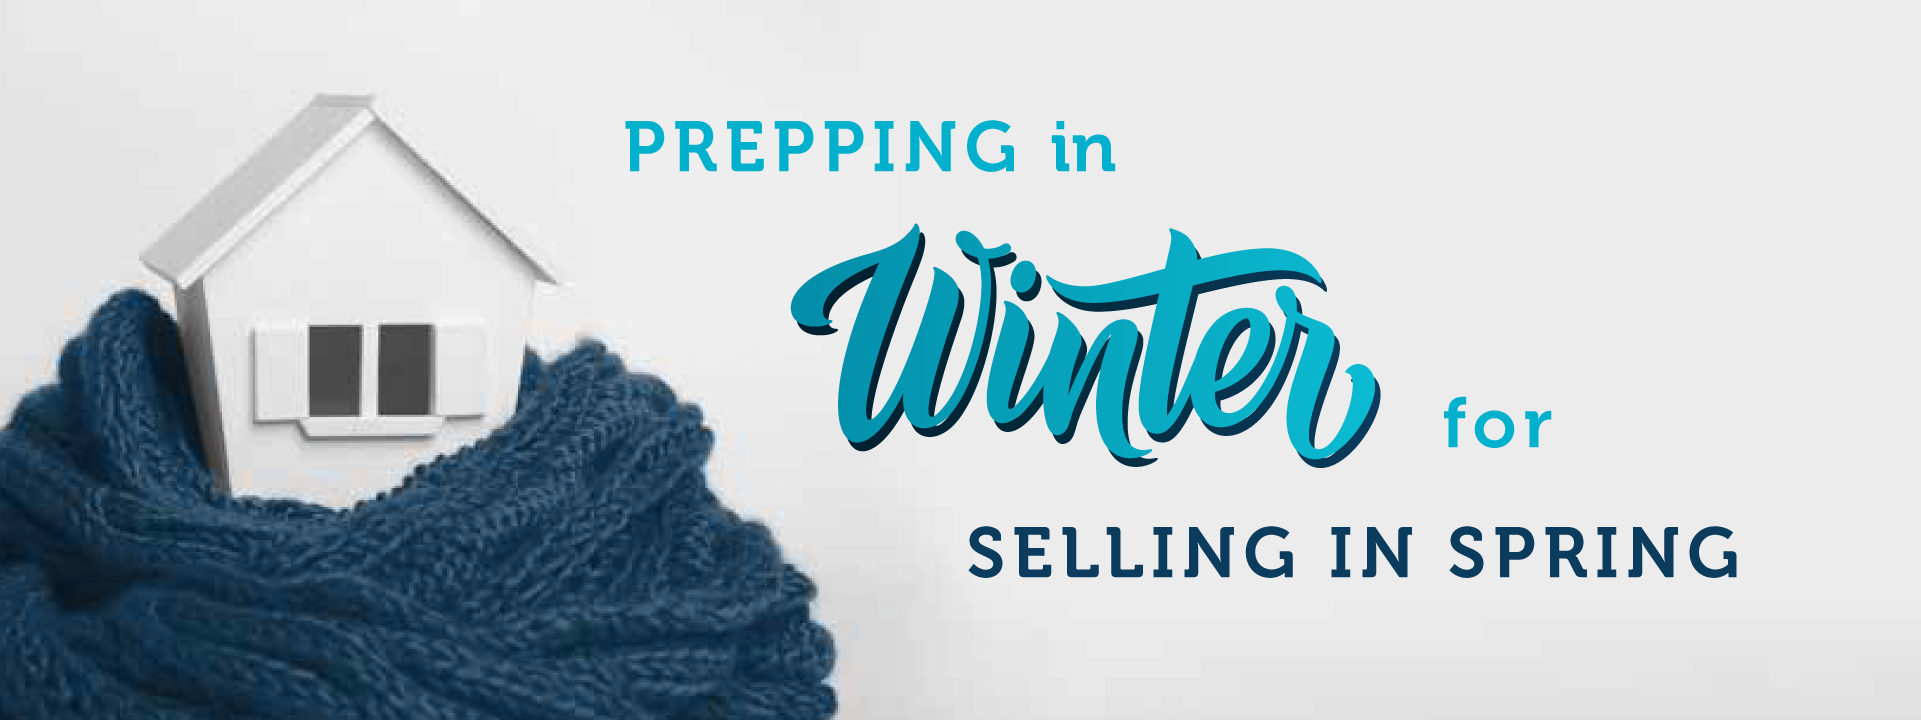 Prepping in winter for selling in spring